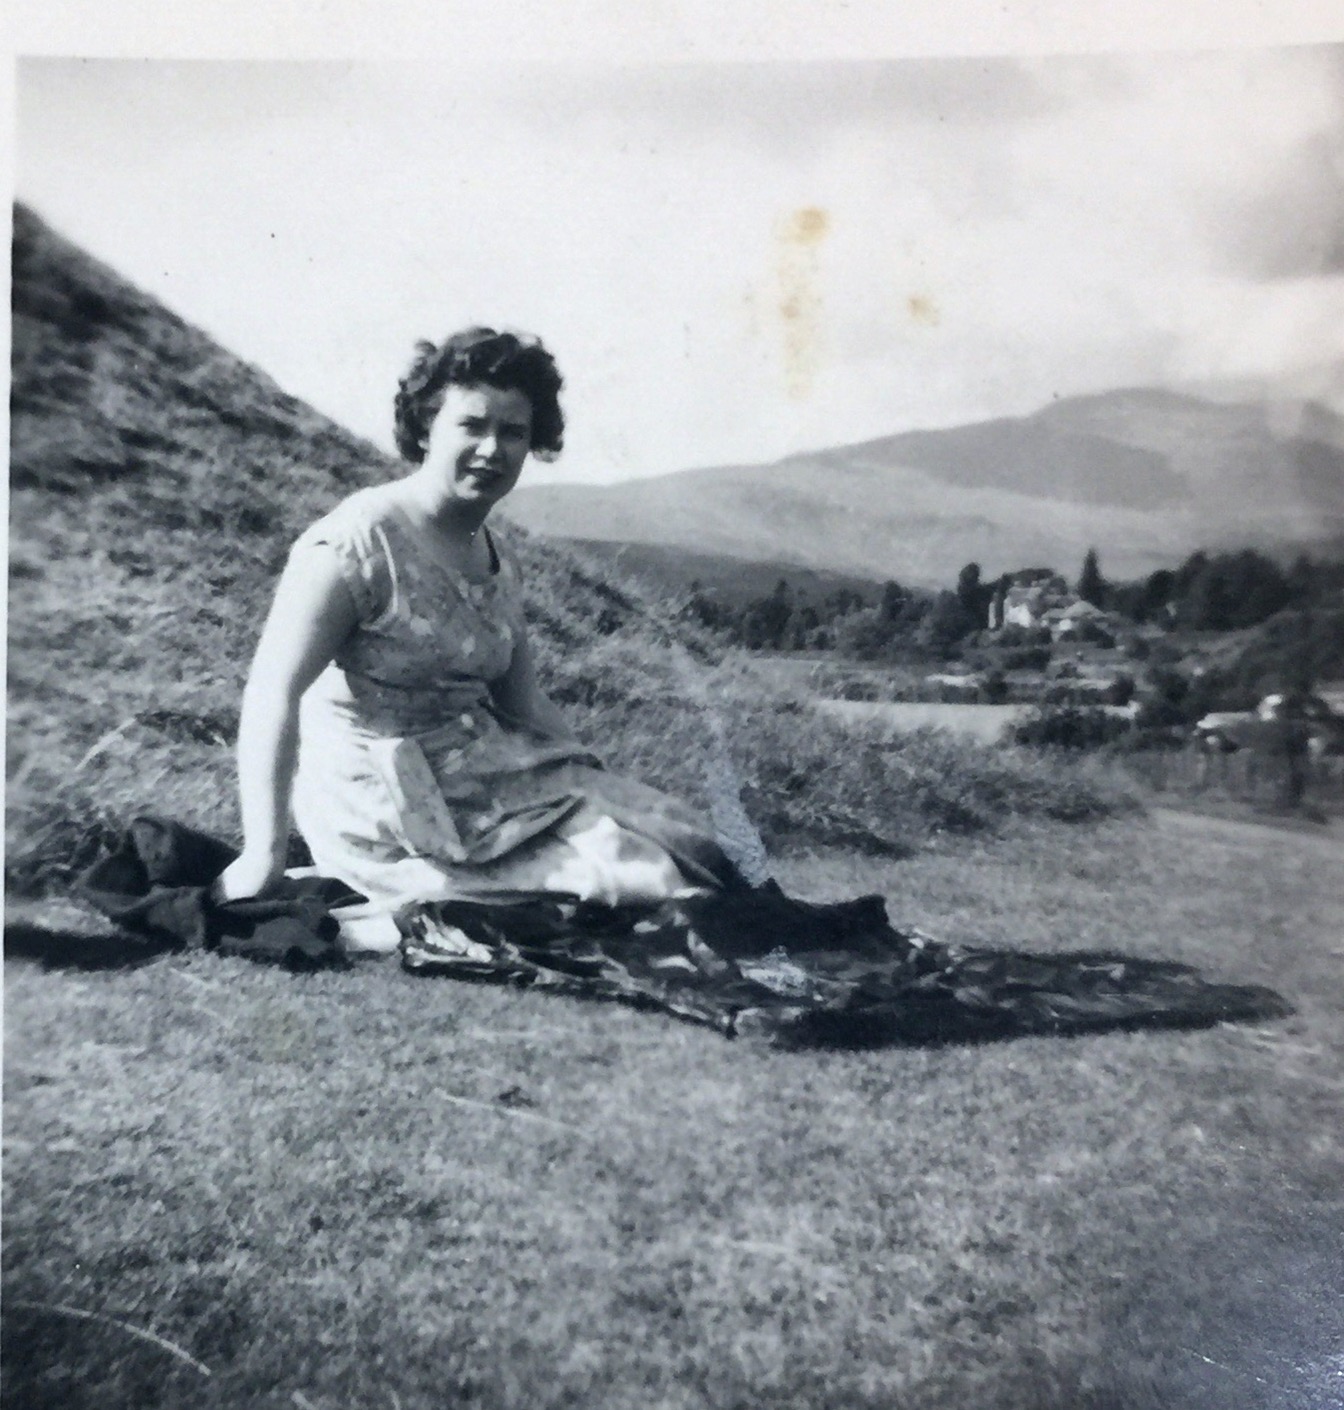 My late mother Janet (1932-2007) taking it easy in the hills of her native Scotland. 1950.